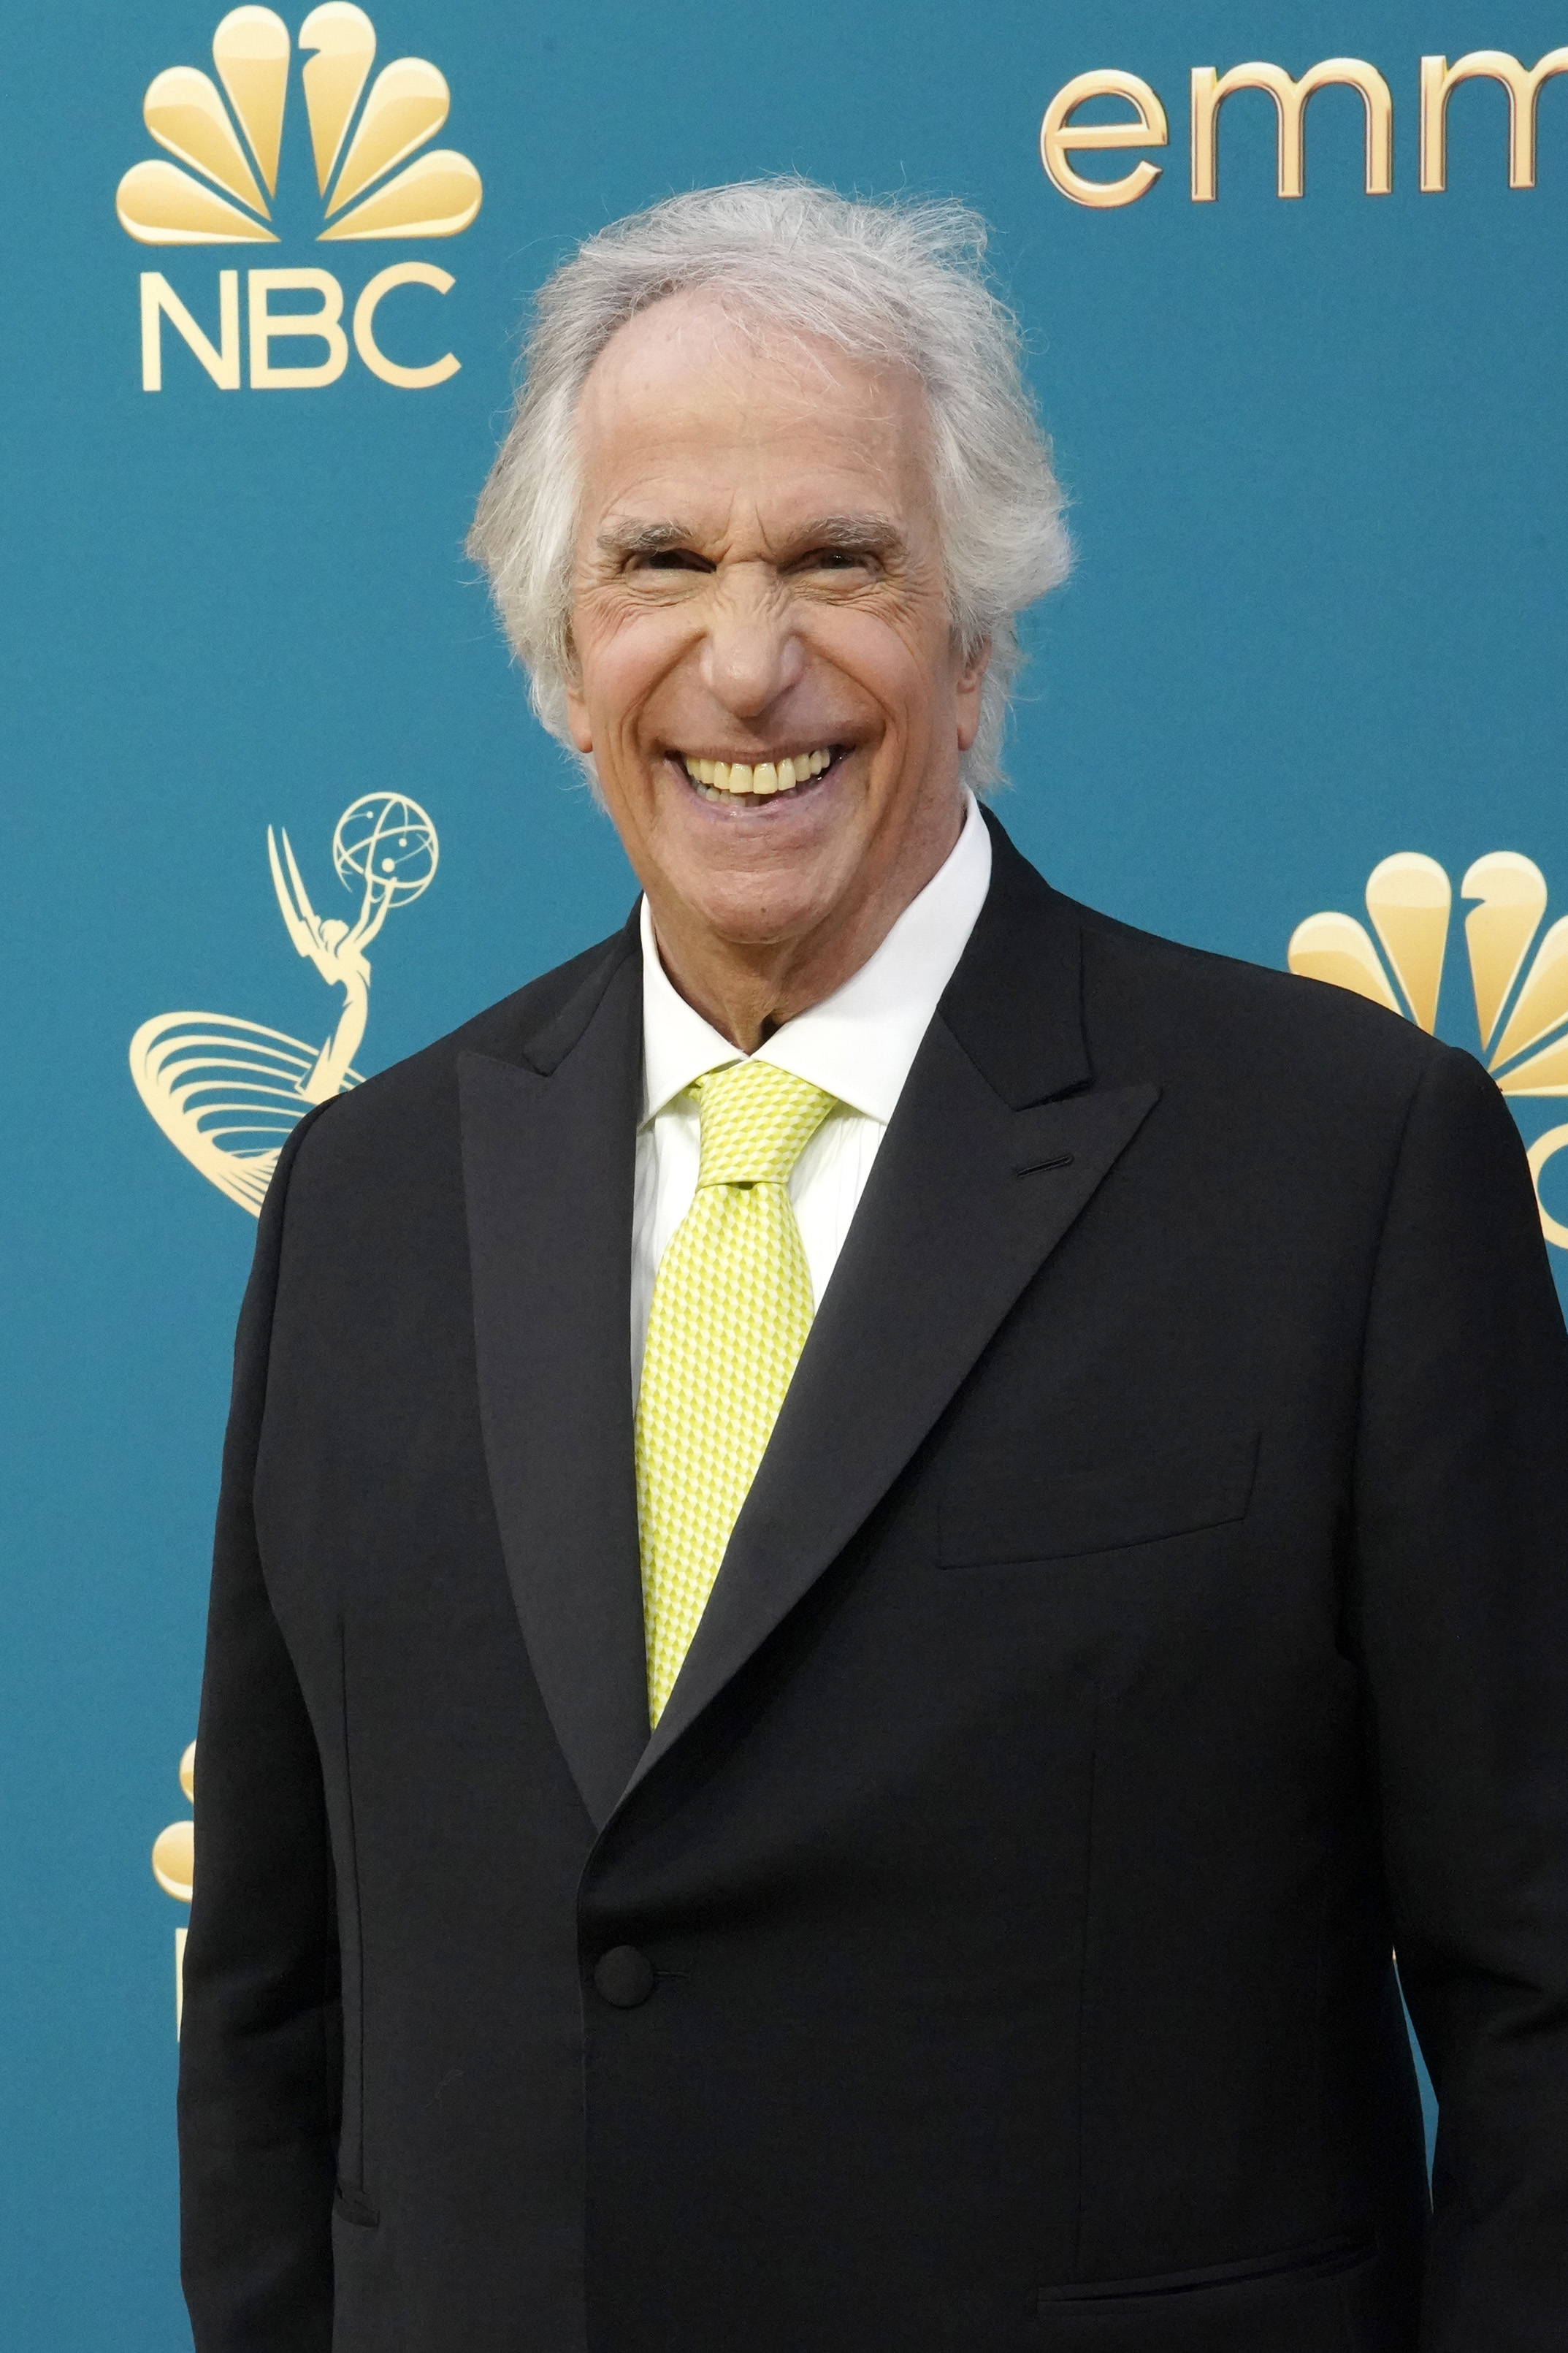 Henry Winkler arrives to the 74th Annual Primetime Emmy Awards held at the Microsoft Theater on September 12, 2022. | Source: Getty Images